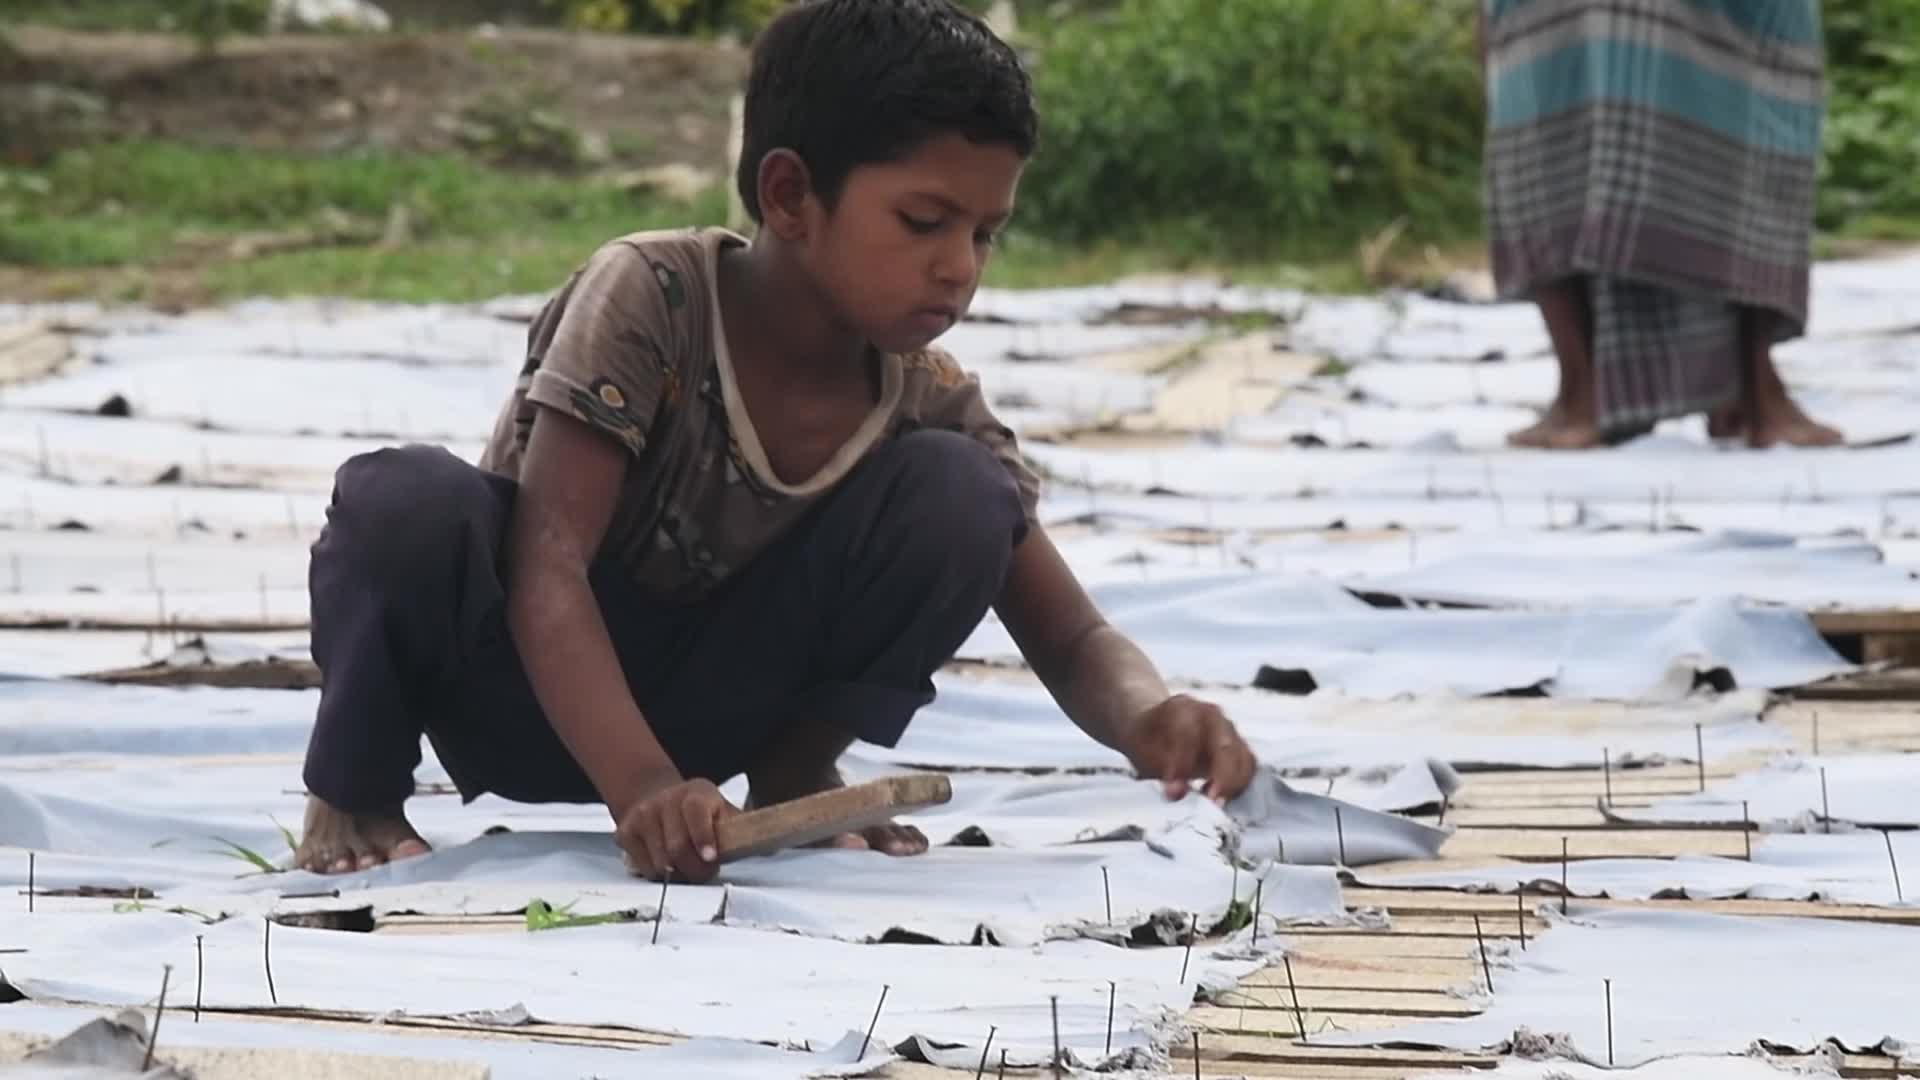 Child Labour in Dhaka